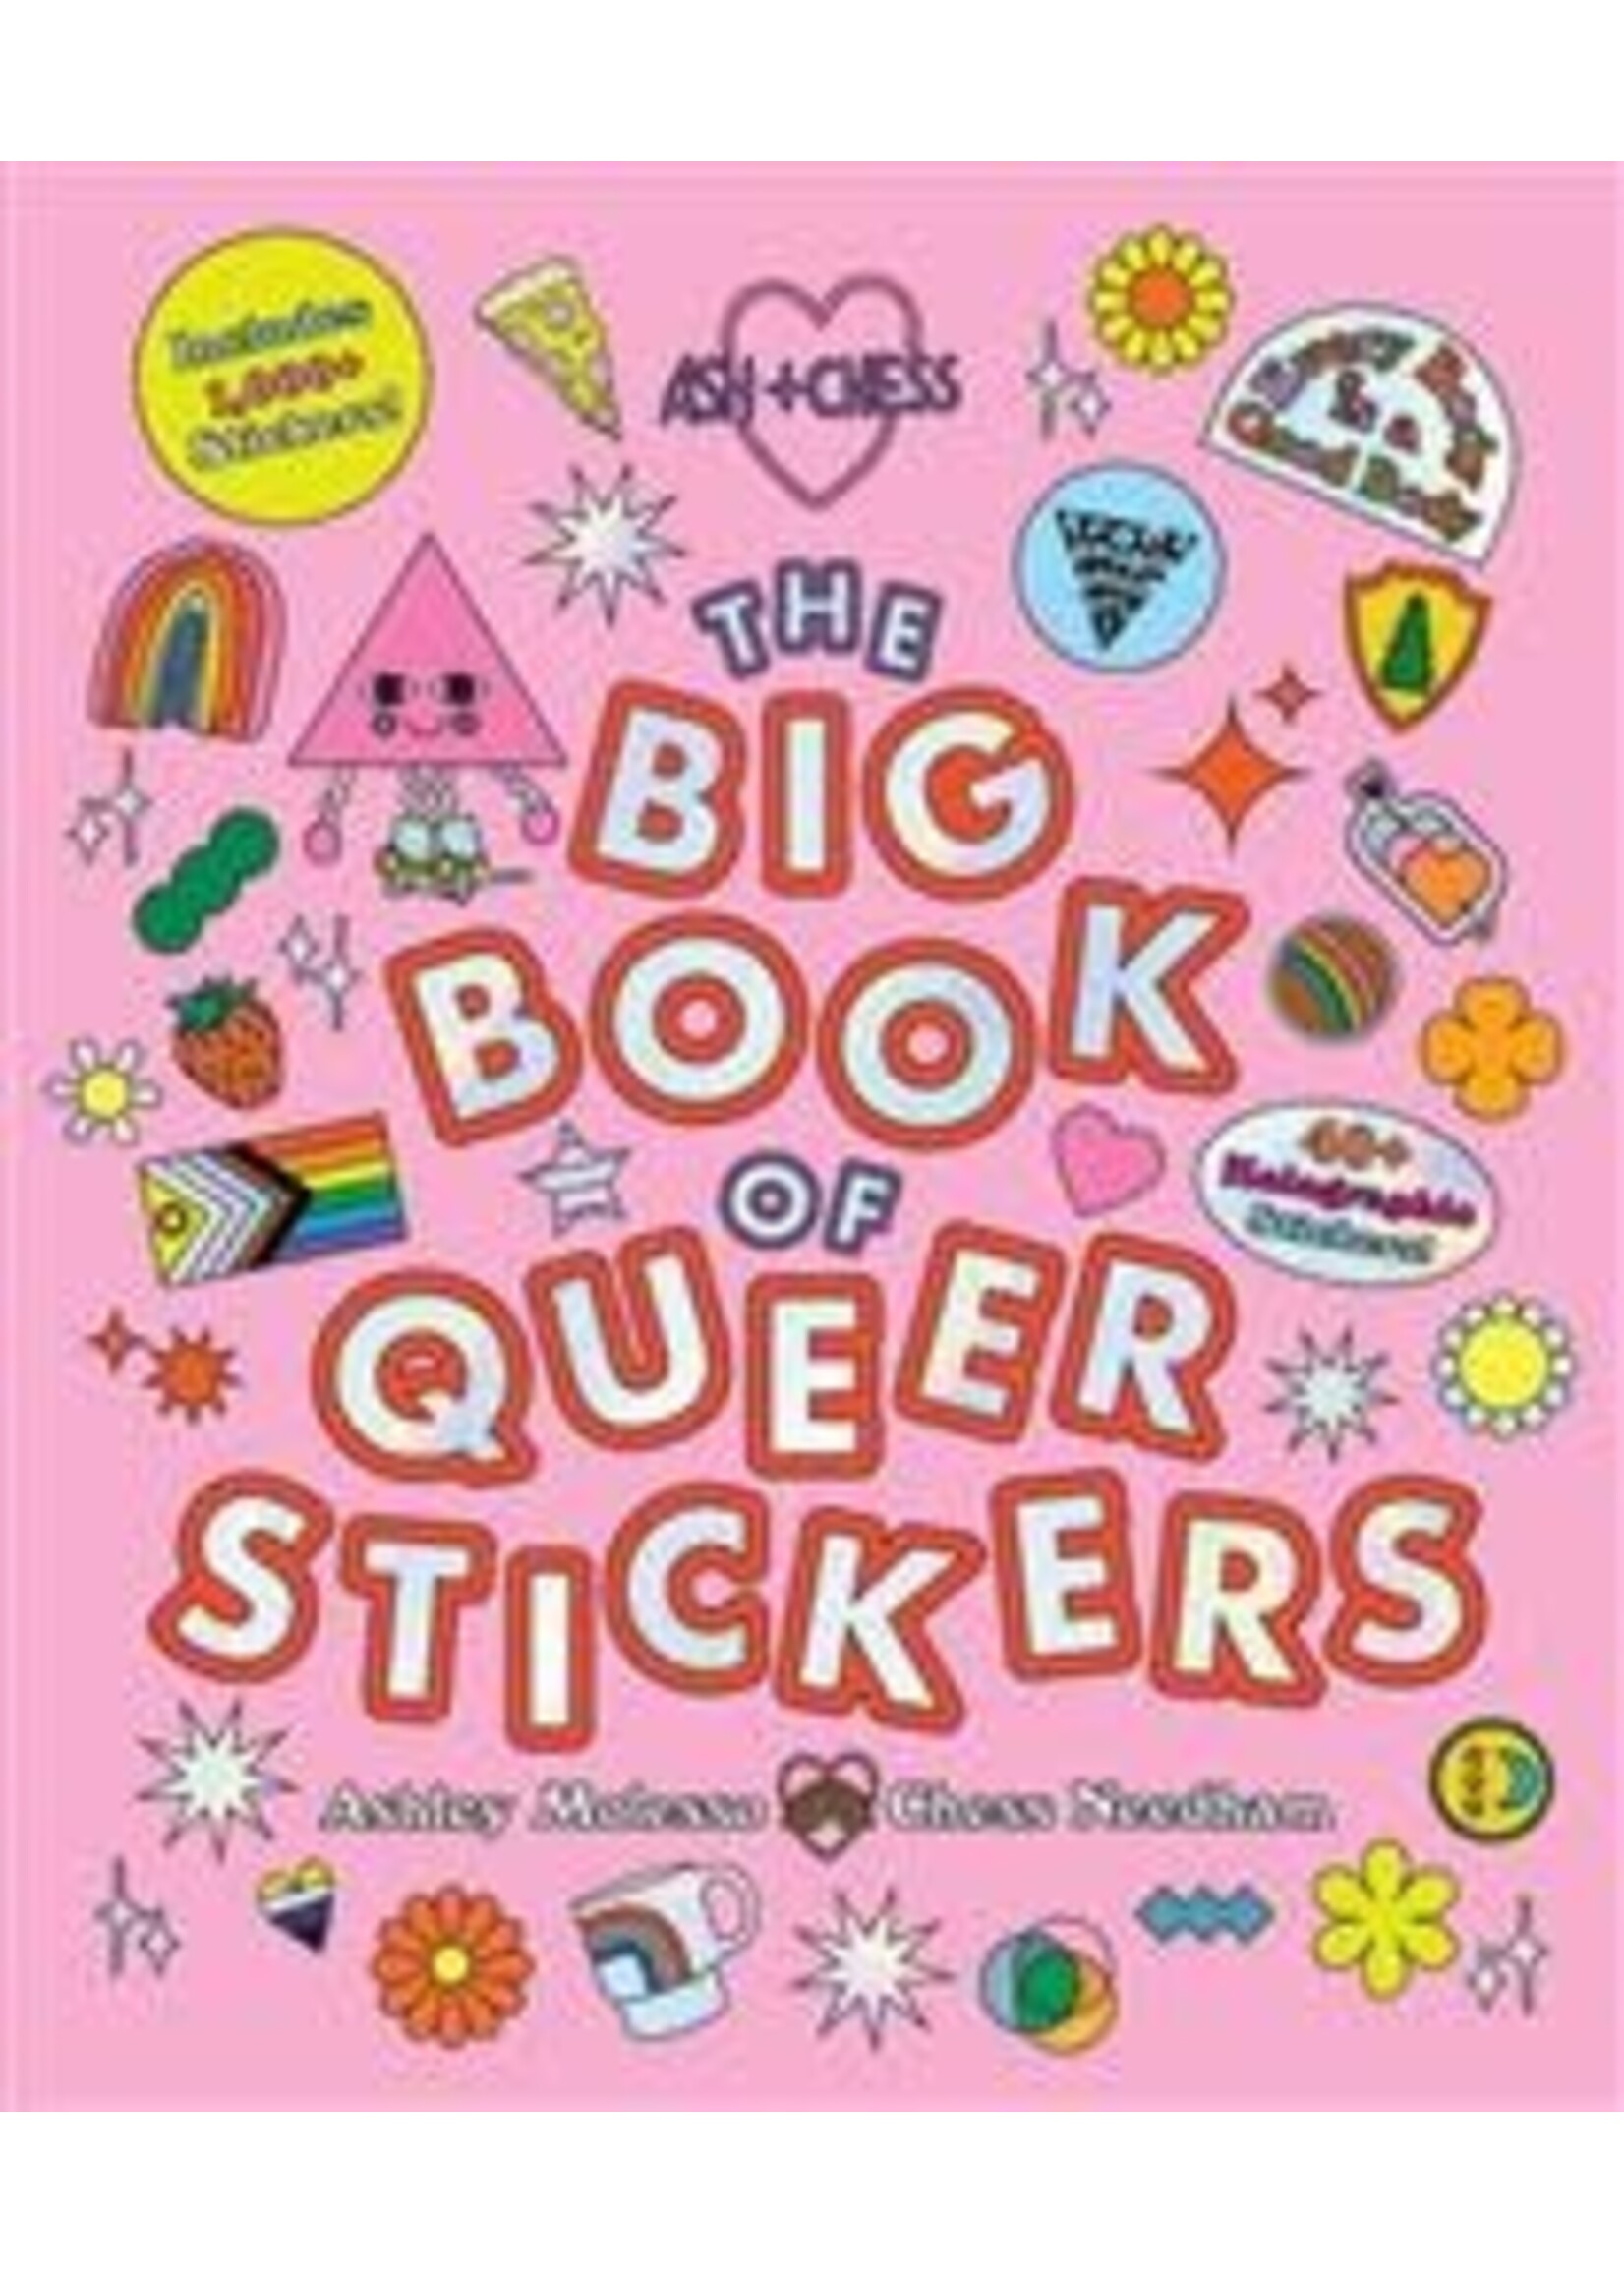 The Big Book of Queer Stickers: Includes 1,000+ Stickers! by Ashley Molesso, Chess Needham